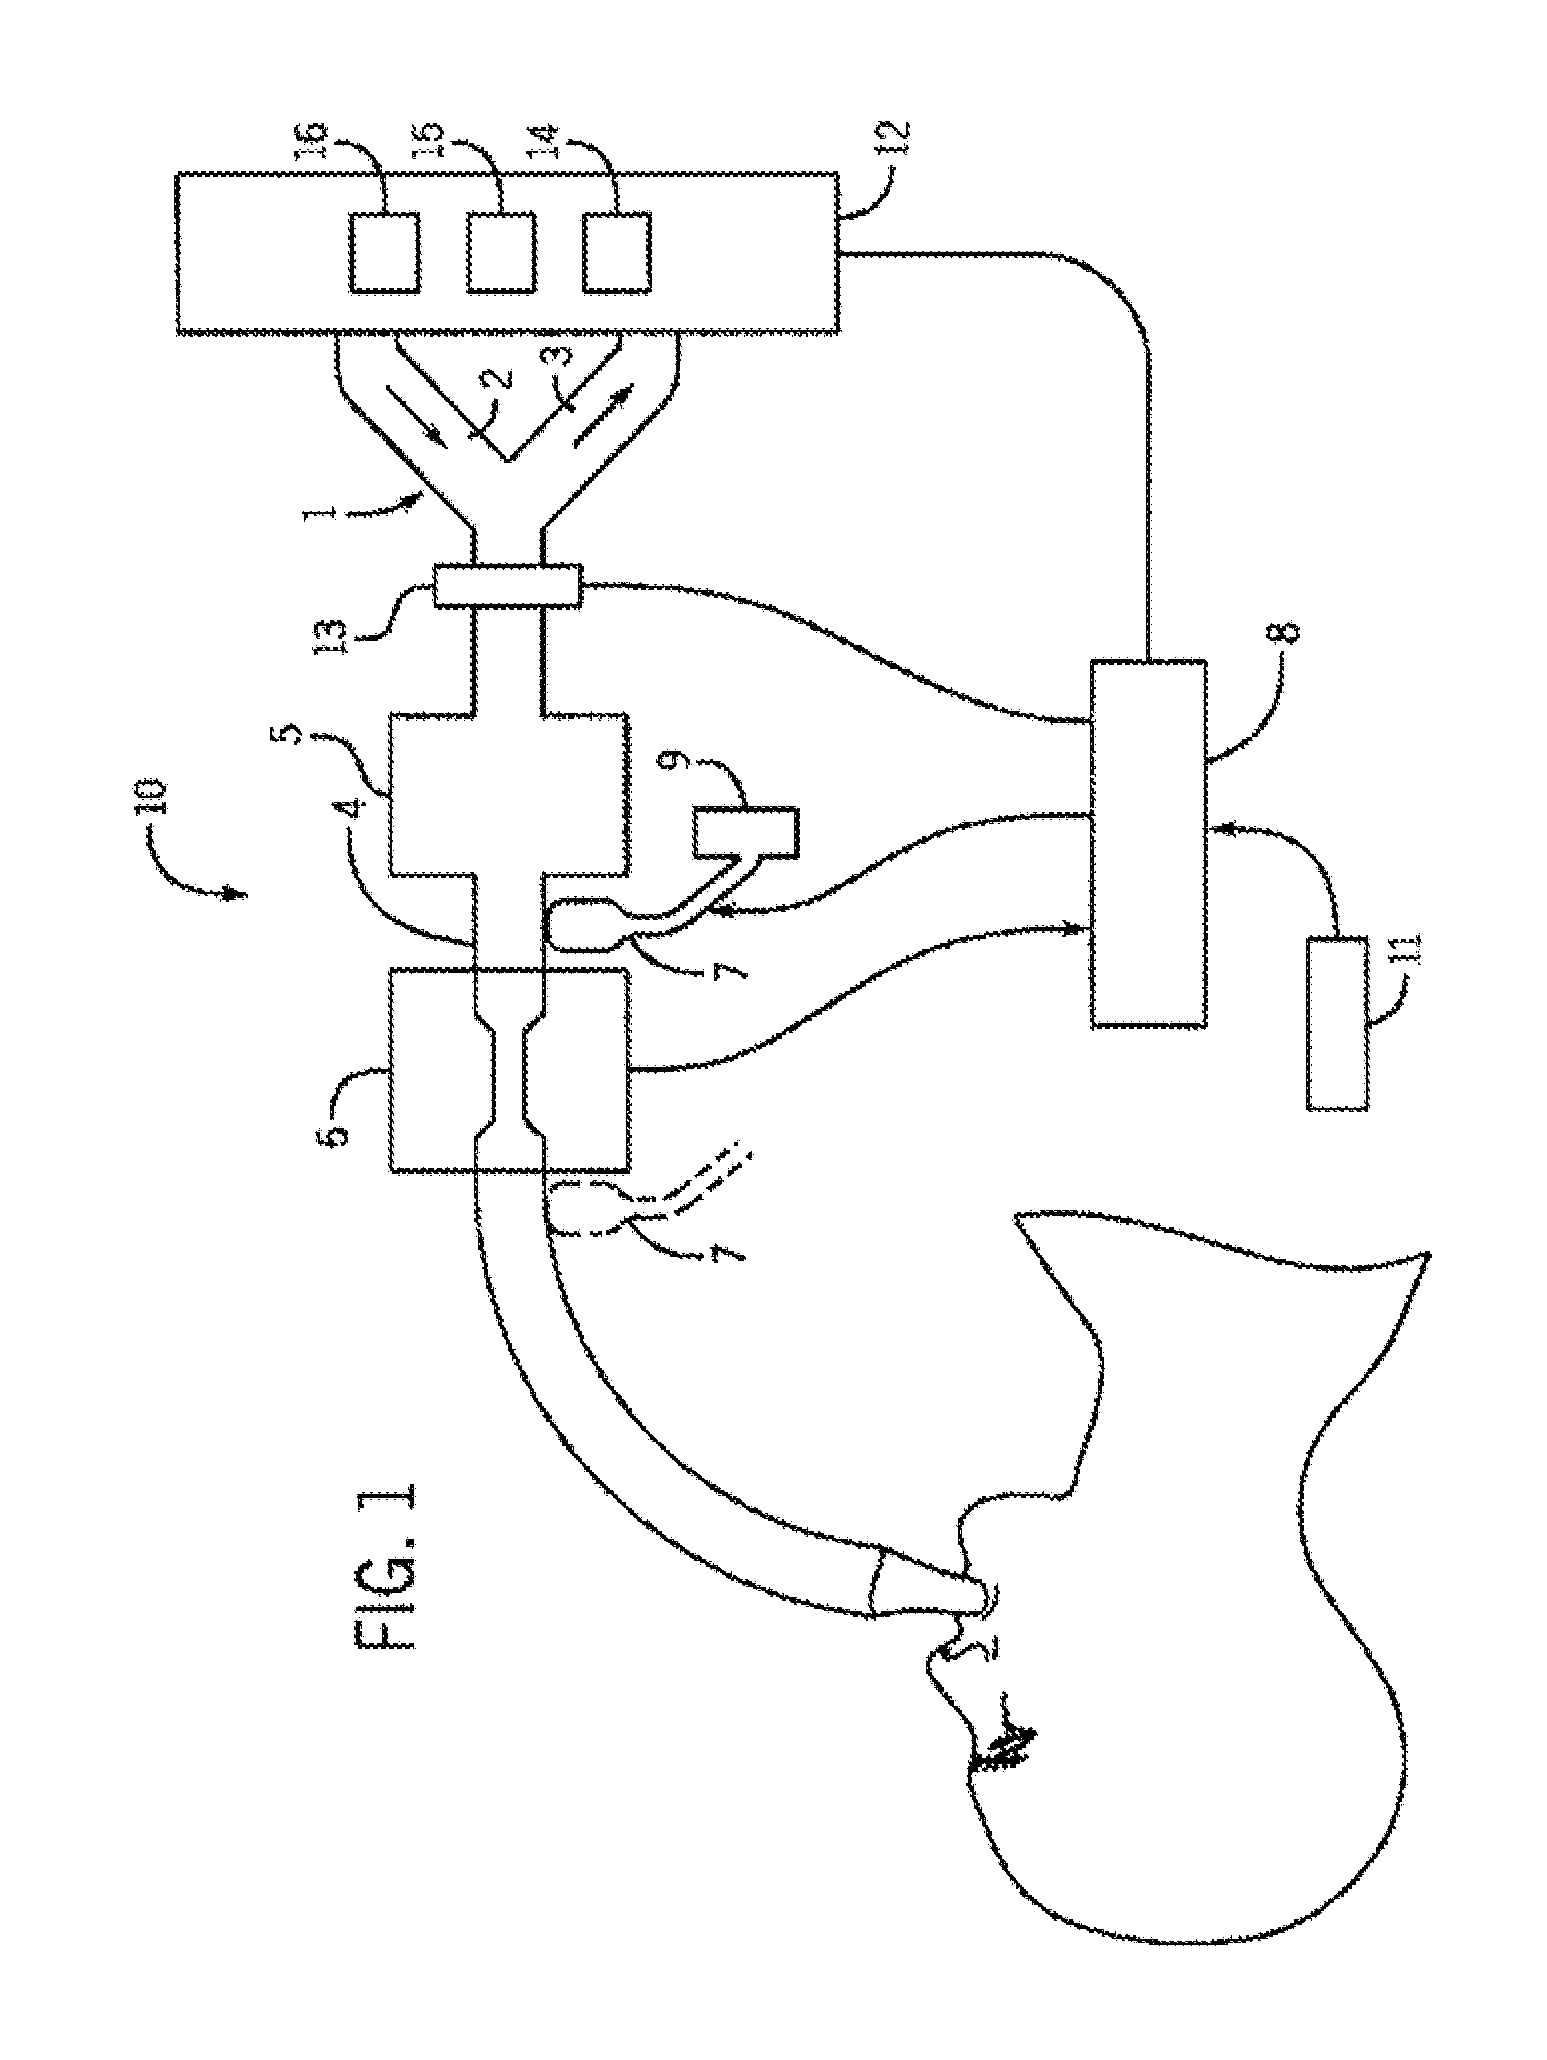 Apparatus, system and method for administering an anesthetic agent for a subject breathing